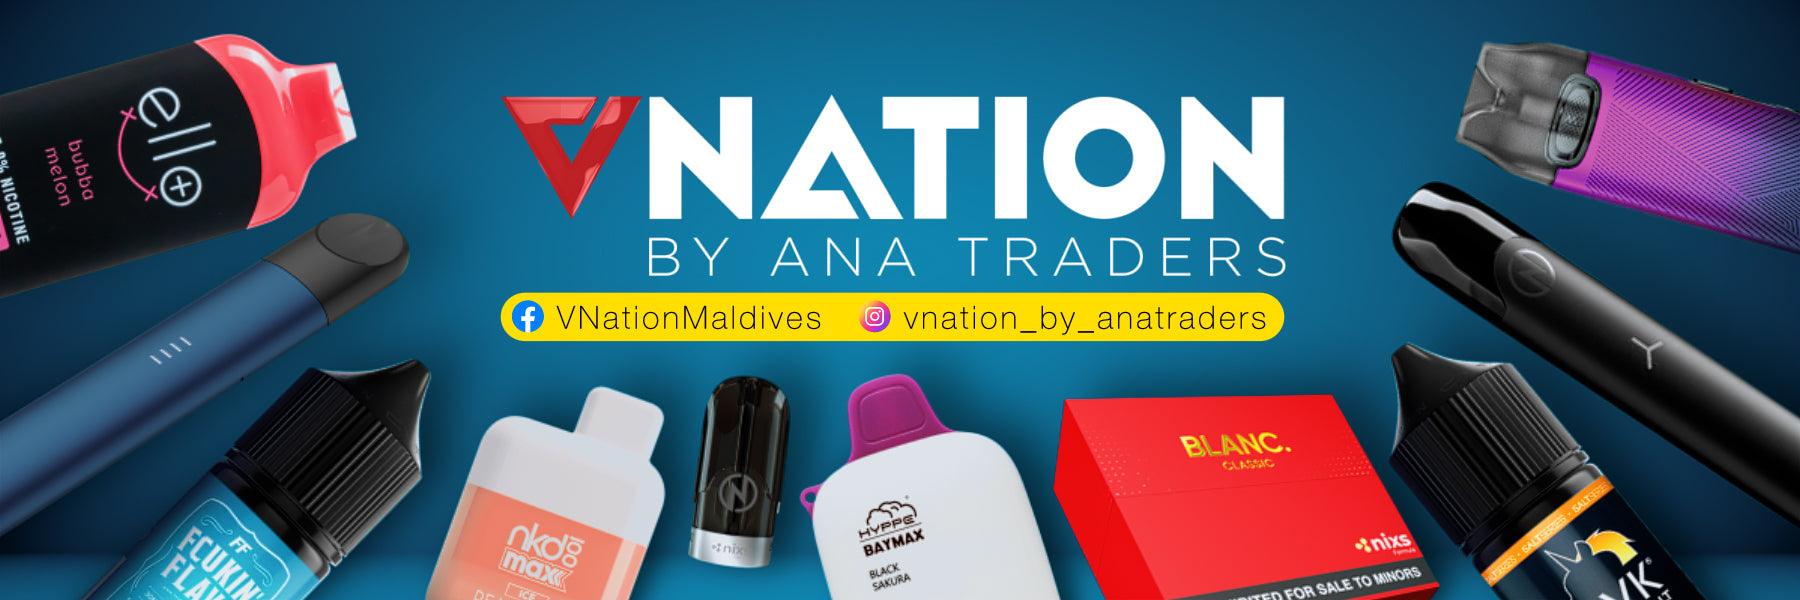 Home page - V Nation by ANA Traders - Vape Store